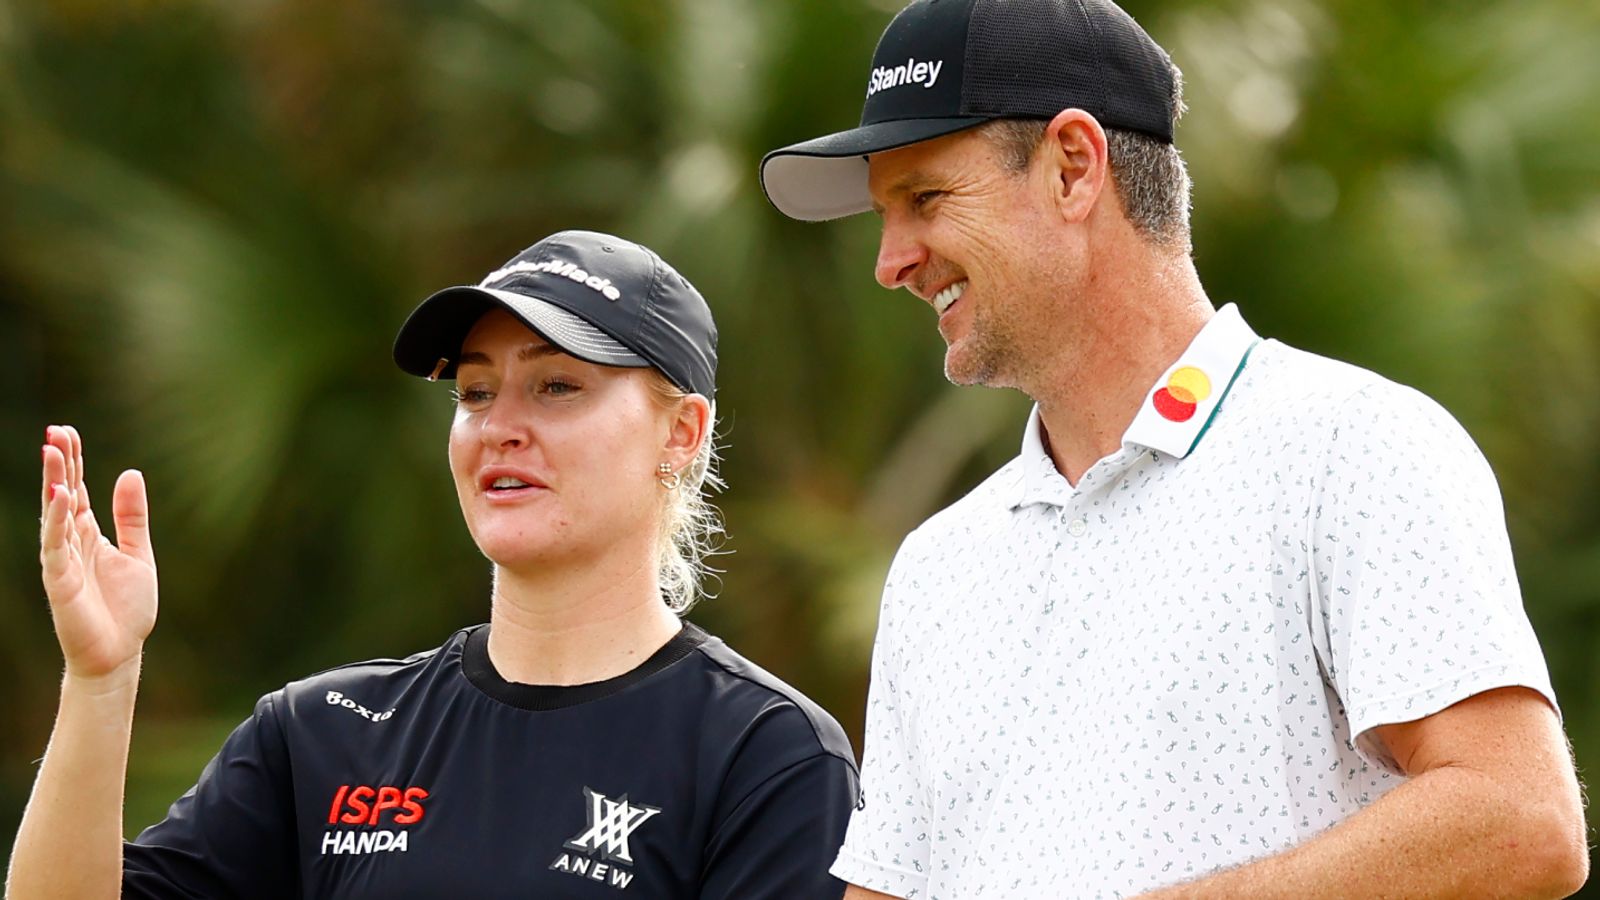 Grant Thornton Invitational Charley Hull and Justin Rose two behind